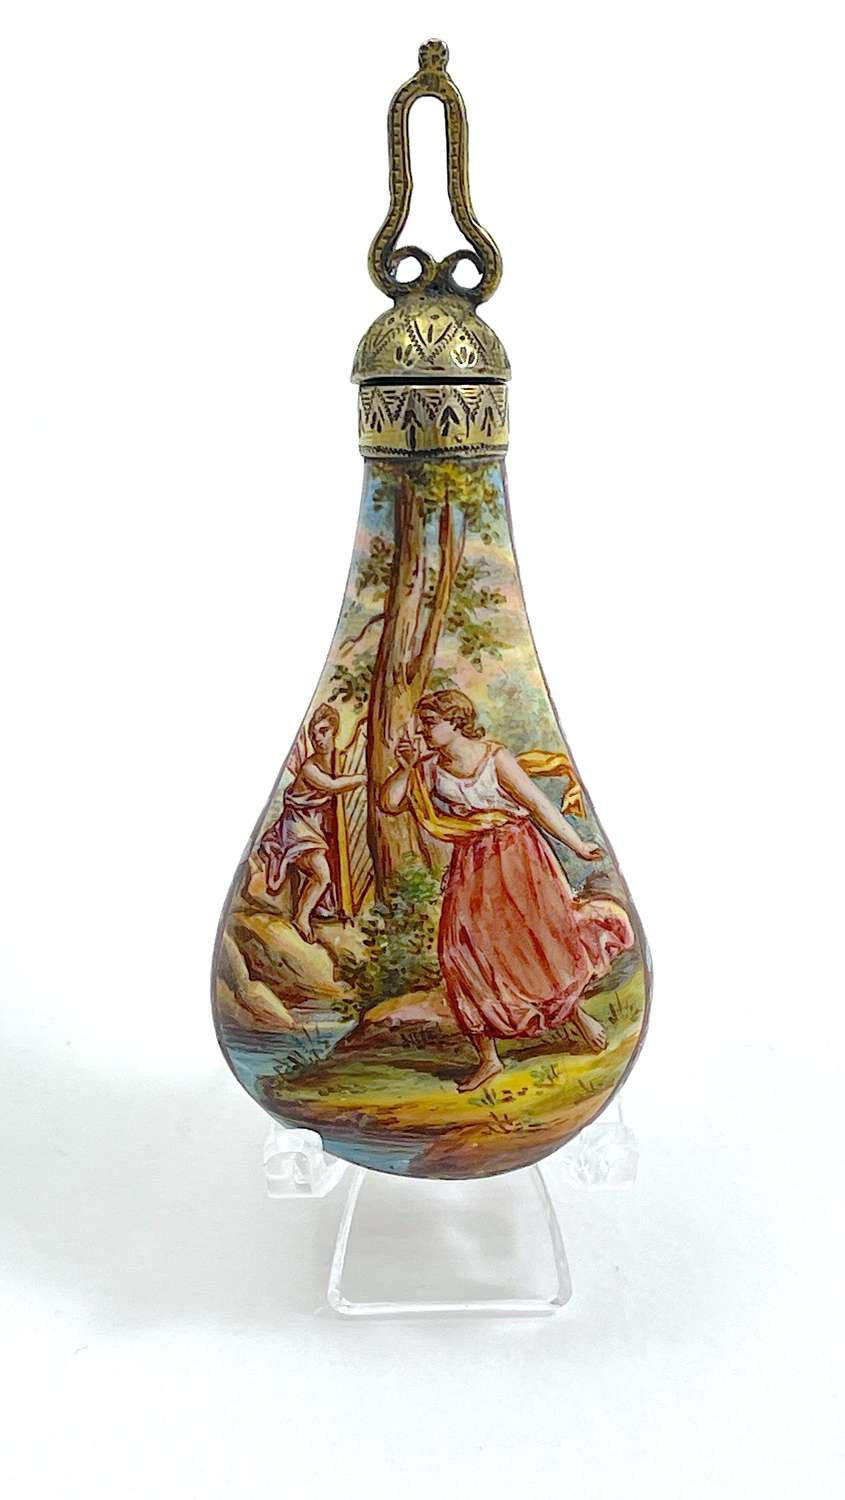 Austrian Enamel Pear Shaped Perfume Bottle with Classical Figures